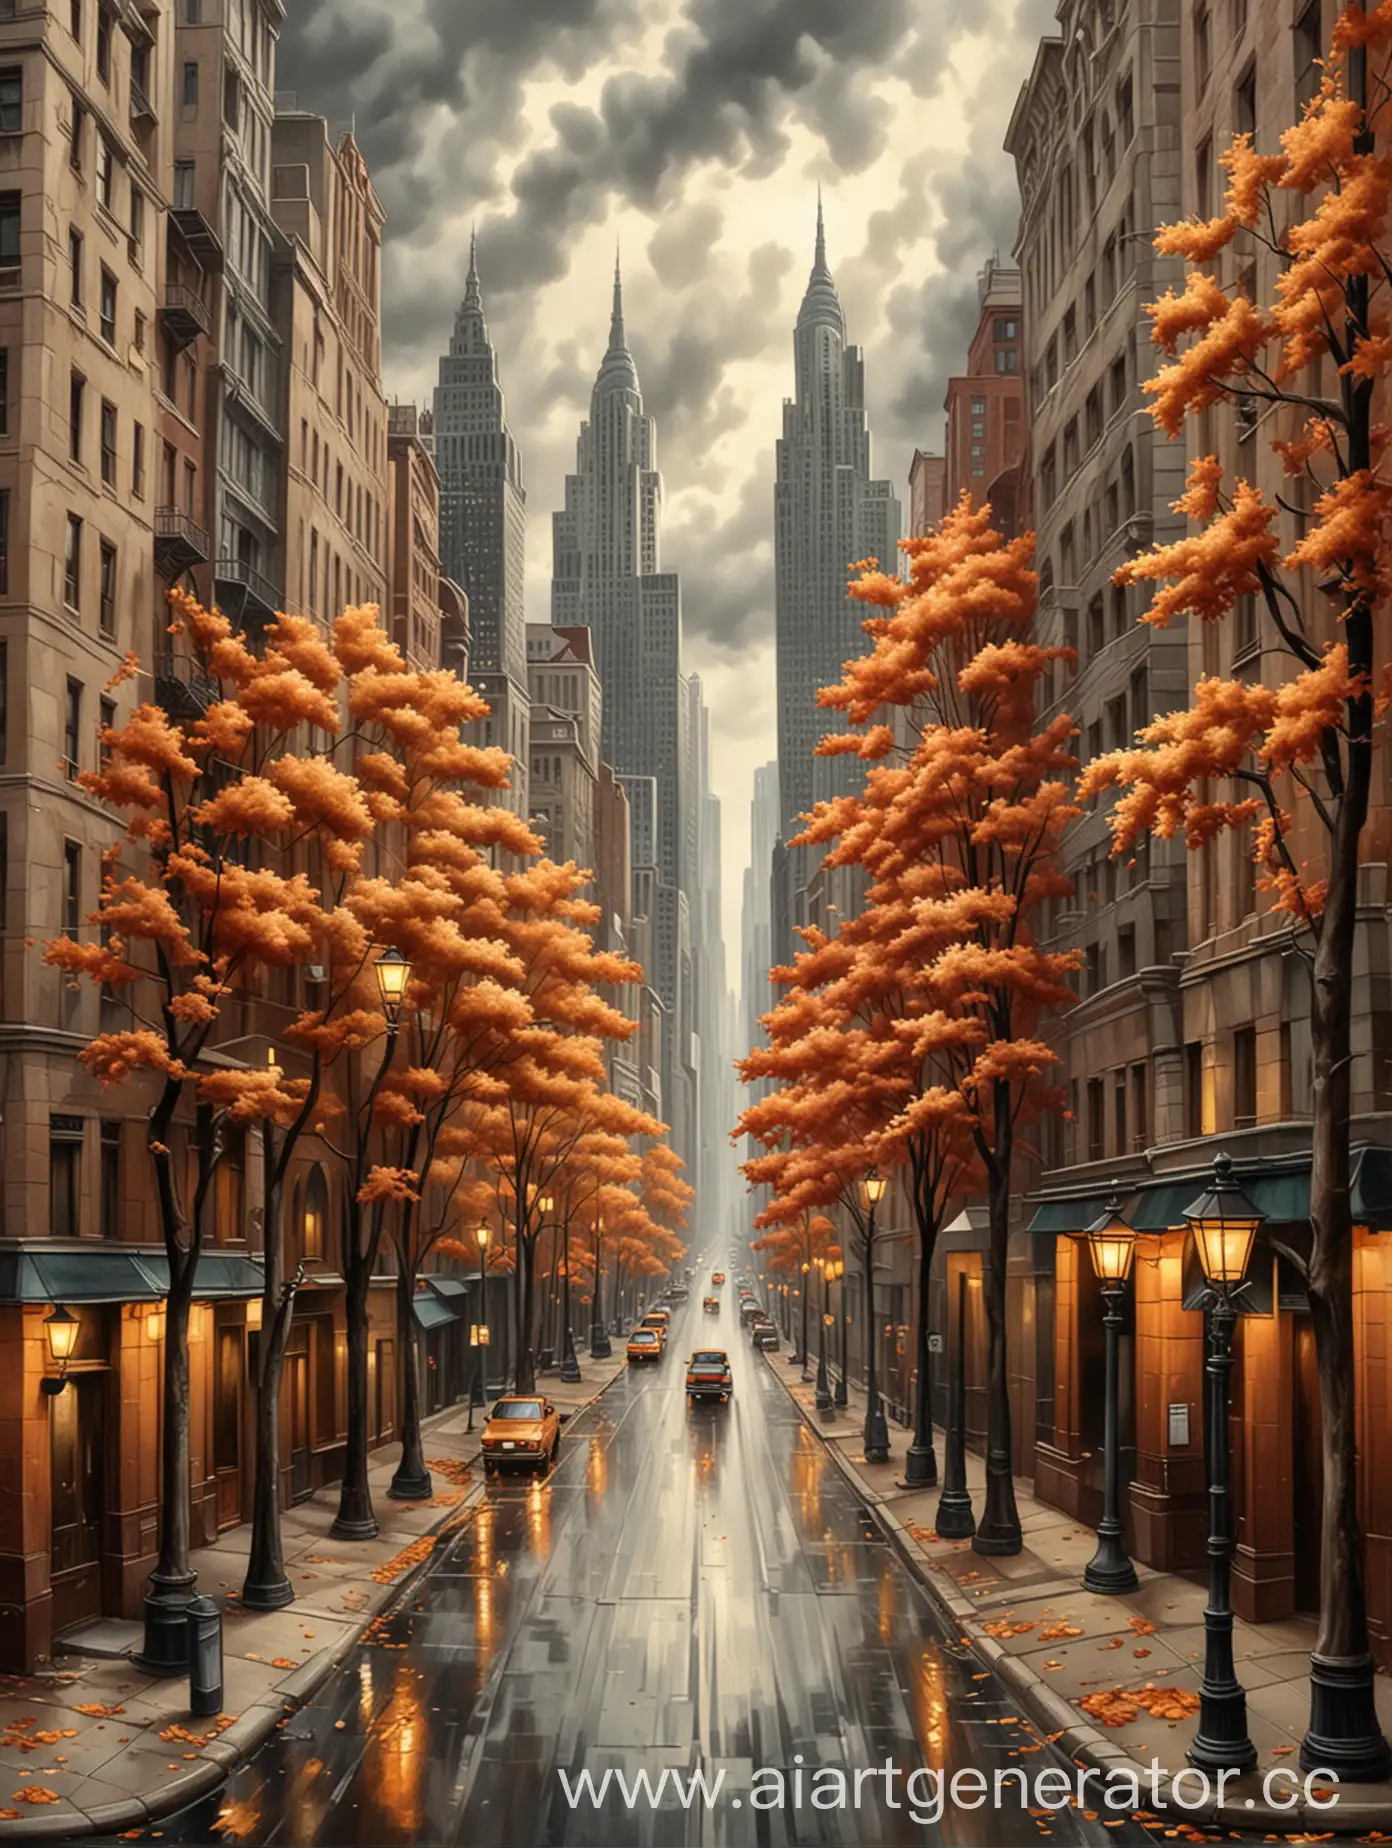 Autumn city perspective in cloudy day with skyscrapers streetlights and trees in the style of Tamara Lempicka